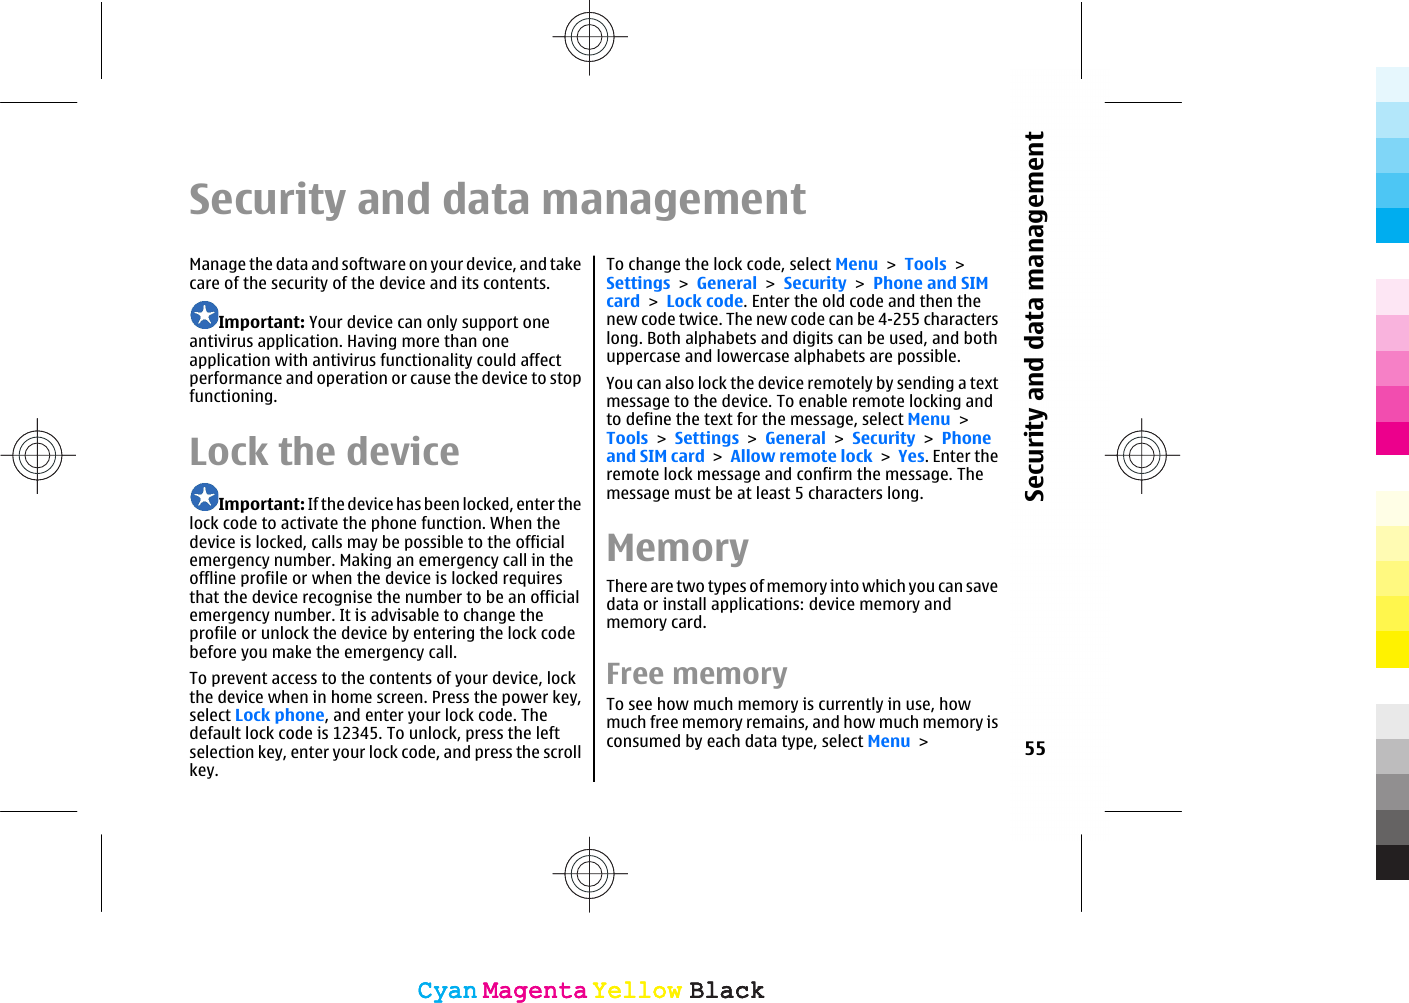 Security and data managementManage the data and software on your device, and takecare of the security of the device and its contents.Important: Your device can only support oneantivirus application. Having more than oneapplication with antivirus functionality could affectperformance and operation or cause the device to stopfunctioning.Lock the deviceImportant: If the device has been locked, enter thelock code to activate the phone function. When thedevice is locked, calls may be possible to the officialemergency number. Making an emergency call in theoffline profile or when the device is locked requiresthat the device recognise the number to be an officialemergency number. It is advisable to change theprofile or unlock the device by entering the lock codebefore you make the emergency call.To prevent access to the contents of your device, lockthe device when in home screen. Press the power key,select Lock phone, and enter your lock code. Thedefault lock code is 12345. To unlock, press the leftselection key, enter your lock code, and press the scrollkey.To change the lock code, select Menu &gt; Tools &gt;Settings &gt; General &gt; Security &gt; Phone and SIMcard &gt; Lock code. Enter the old code and then thenew code twice. The new code can be 4-255 characterslong. Both alphabets and digits can be used, and bothuppercase and lowercase alphabets are possible.You can also lock the device remotely by sending a textmessage to the device. To enable remote locking andto define the text for the message, select Menu &gt;Tools &gt; Settings &gt; General &gt; Security &gt; Phoneand SIM card &gt; Allow remote lock &gt; Yes. Enter theremote lock message and confirm the message. Themessage must be at least 5 characters long.MemoryThere are two types of memory into which you can savedata or install applications: device memory andmemory card.Free memoryTo see how much memory is currently in use, howmuch free memory remains, and how much memory isconsumed by each data type, select Menu &gt; 55Security and data managementCyanCyanMagentaMagentaYellowYellowBlackBlackCyanCyanMagentaMagentaYellowYellowBlackBlack